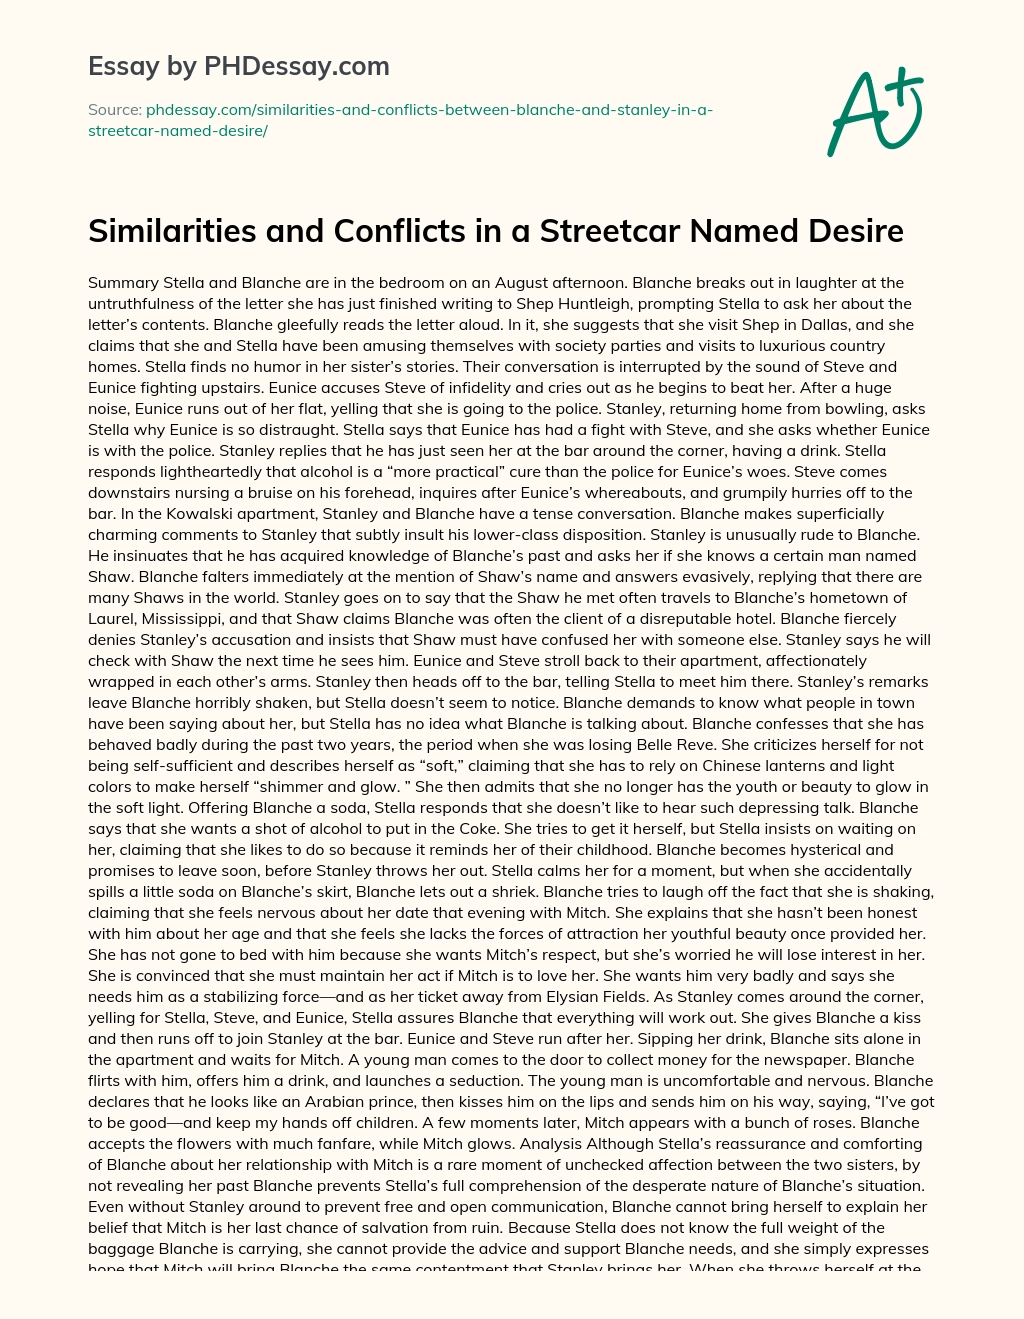 Similarities and Conflicts in  a Streetcar Named Desire essay